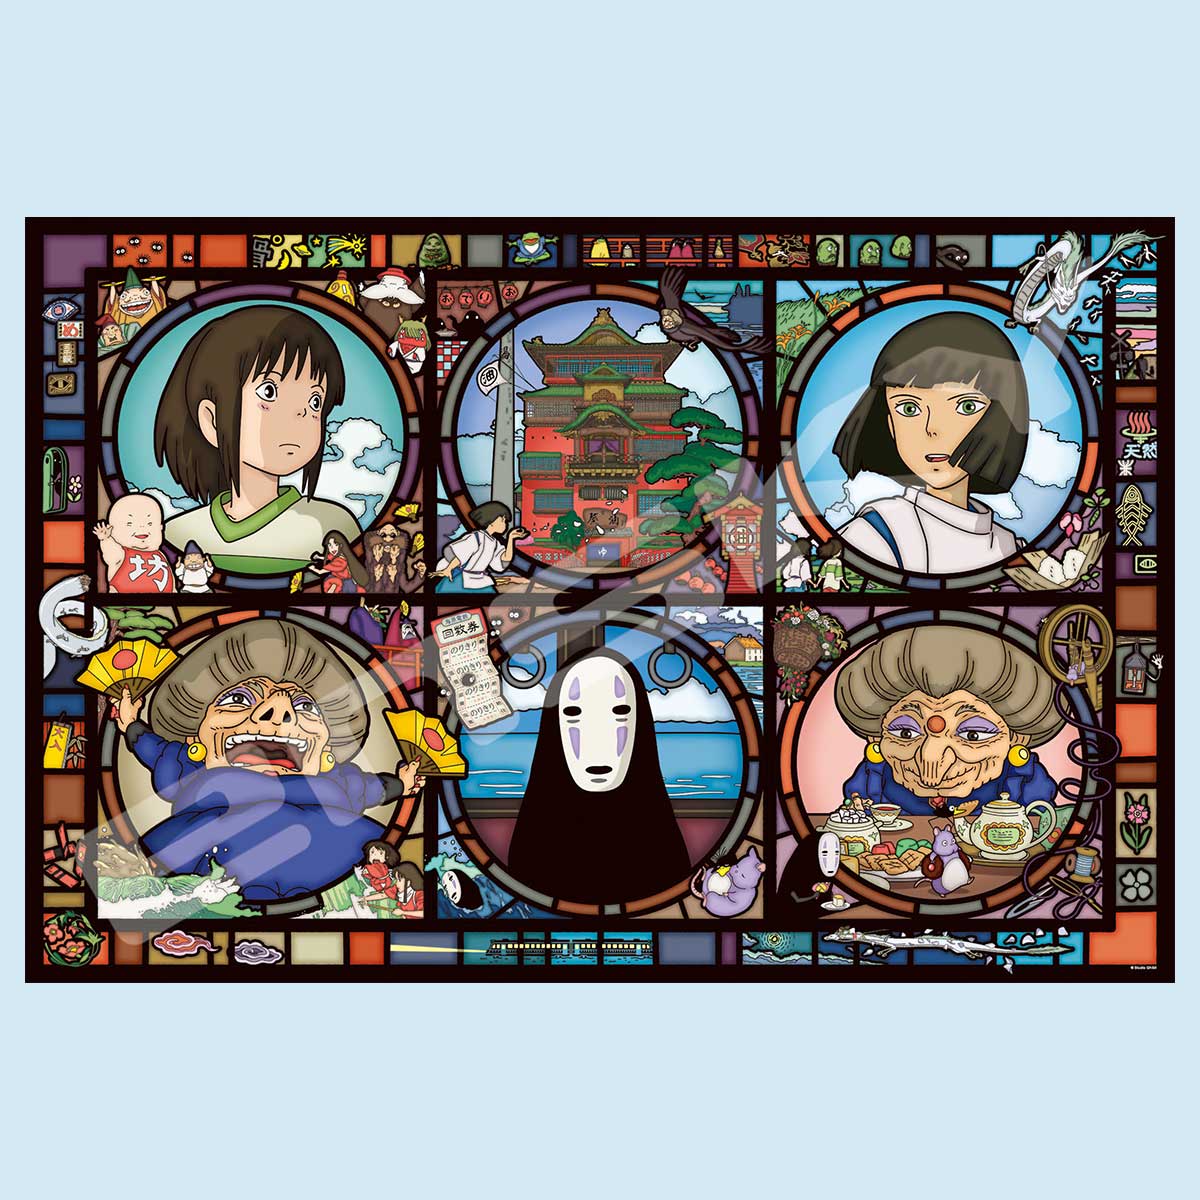 Spirited Away: News from a Mysterious Town (Artcrystal Puzzle) 